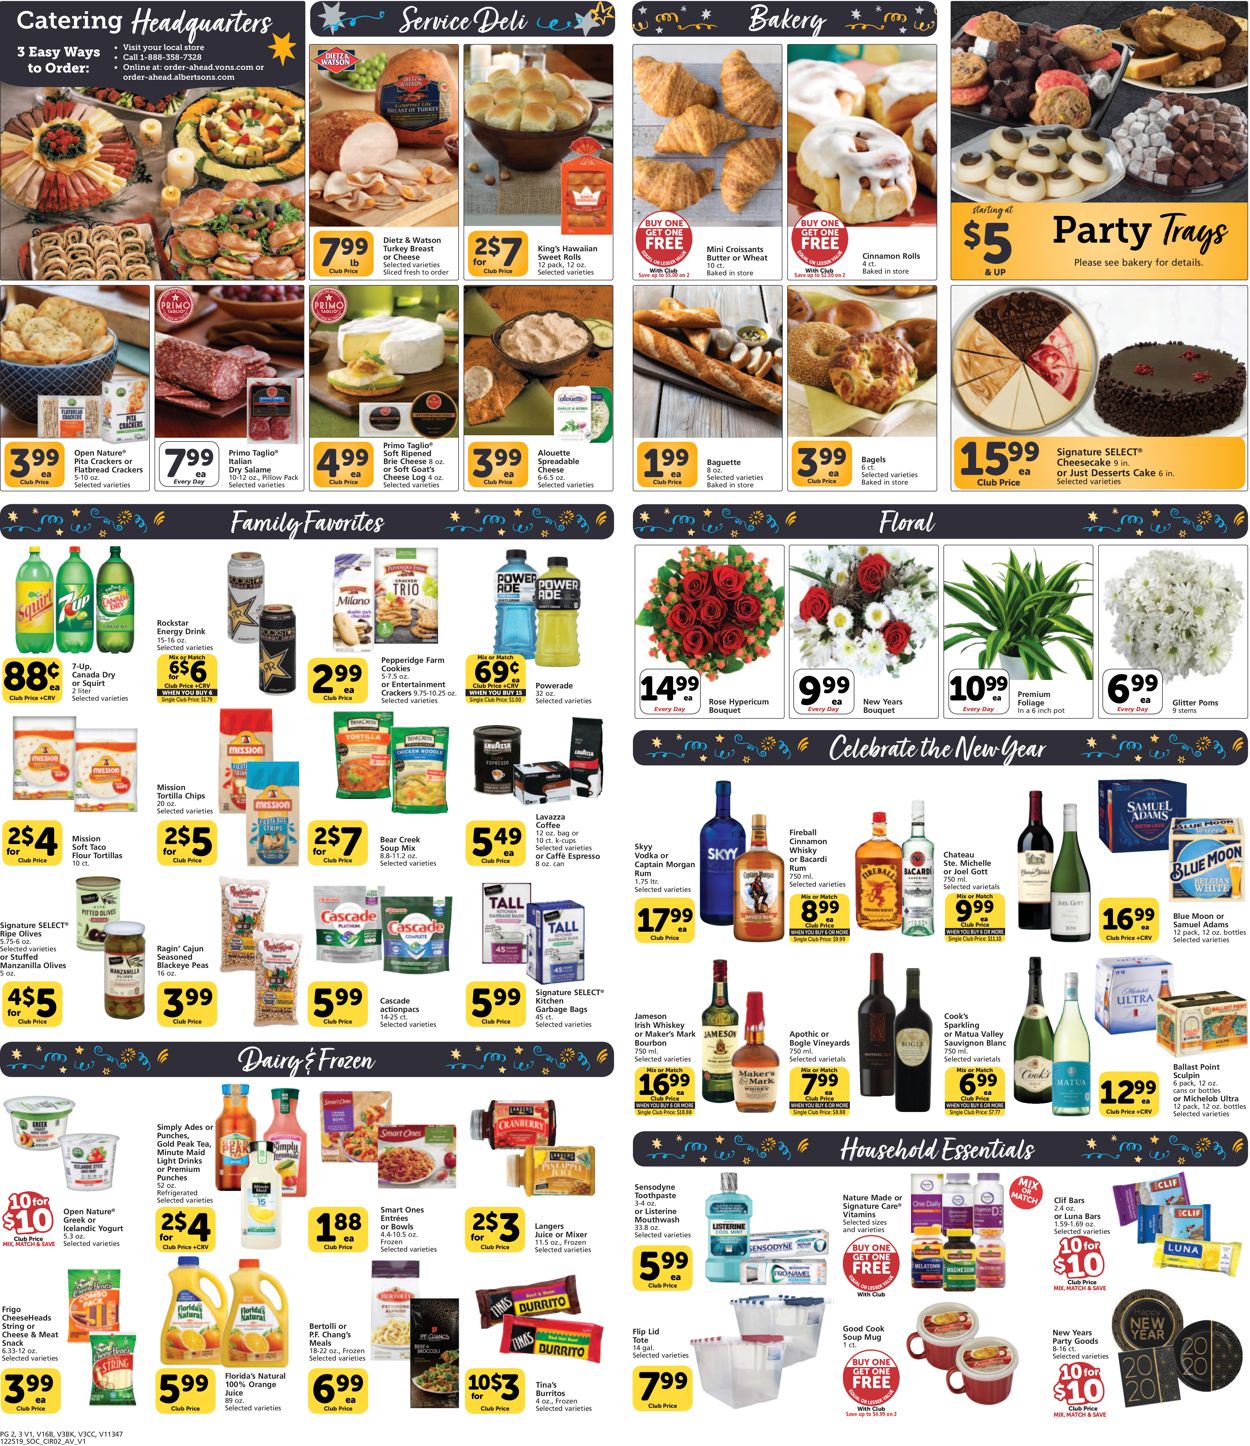 Vons - New Years's Ad 2019/2020 Weekly Ad Circular - valid 12/28-12/31/2019 (Page 4)